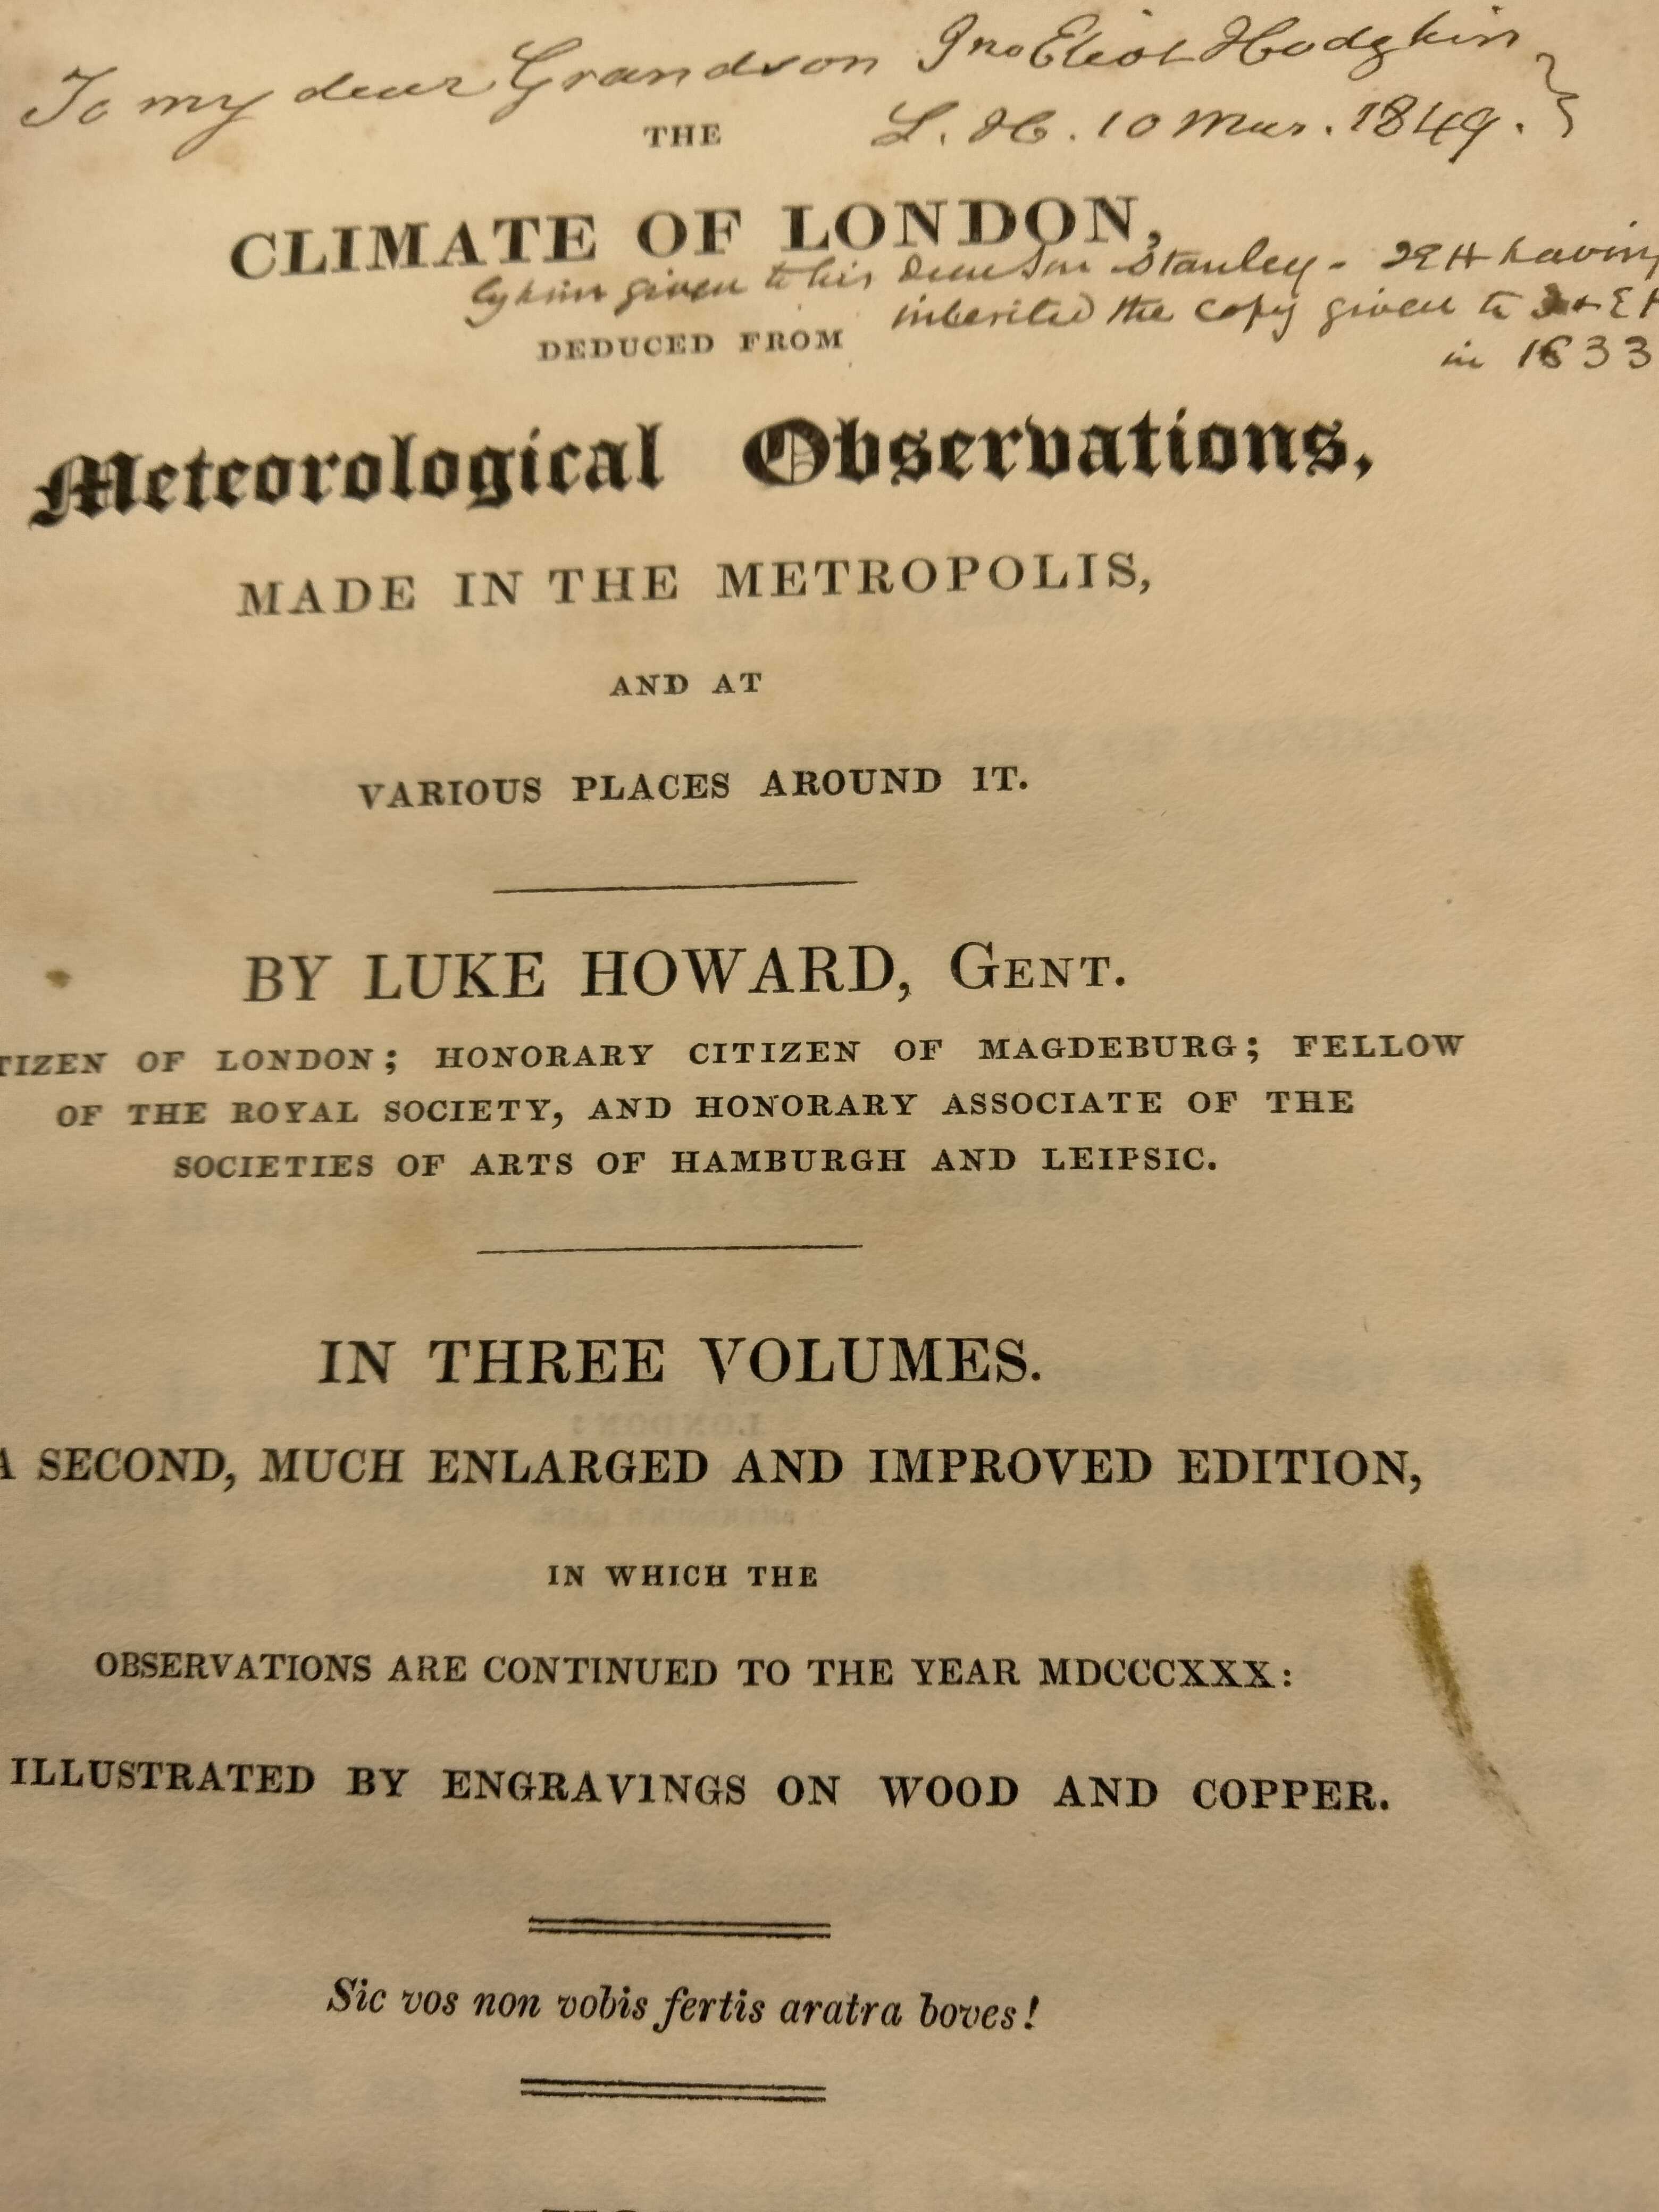 Howard, Luke, The Climate of London, Deduced From Meteorological Observations Made in the Metropolis and at Various Places Around It, second edition, 3 vols, 1833